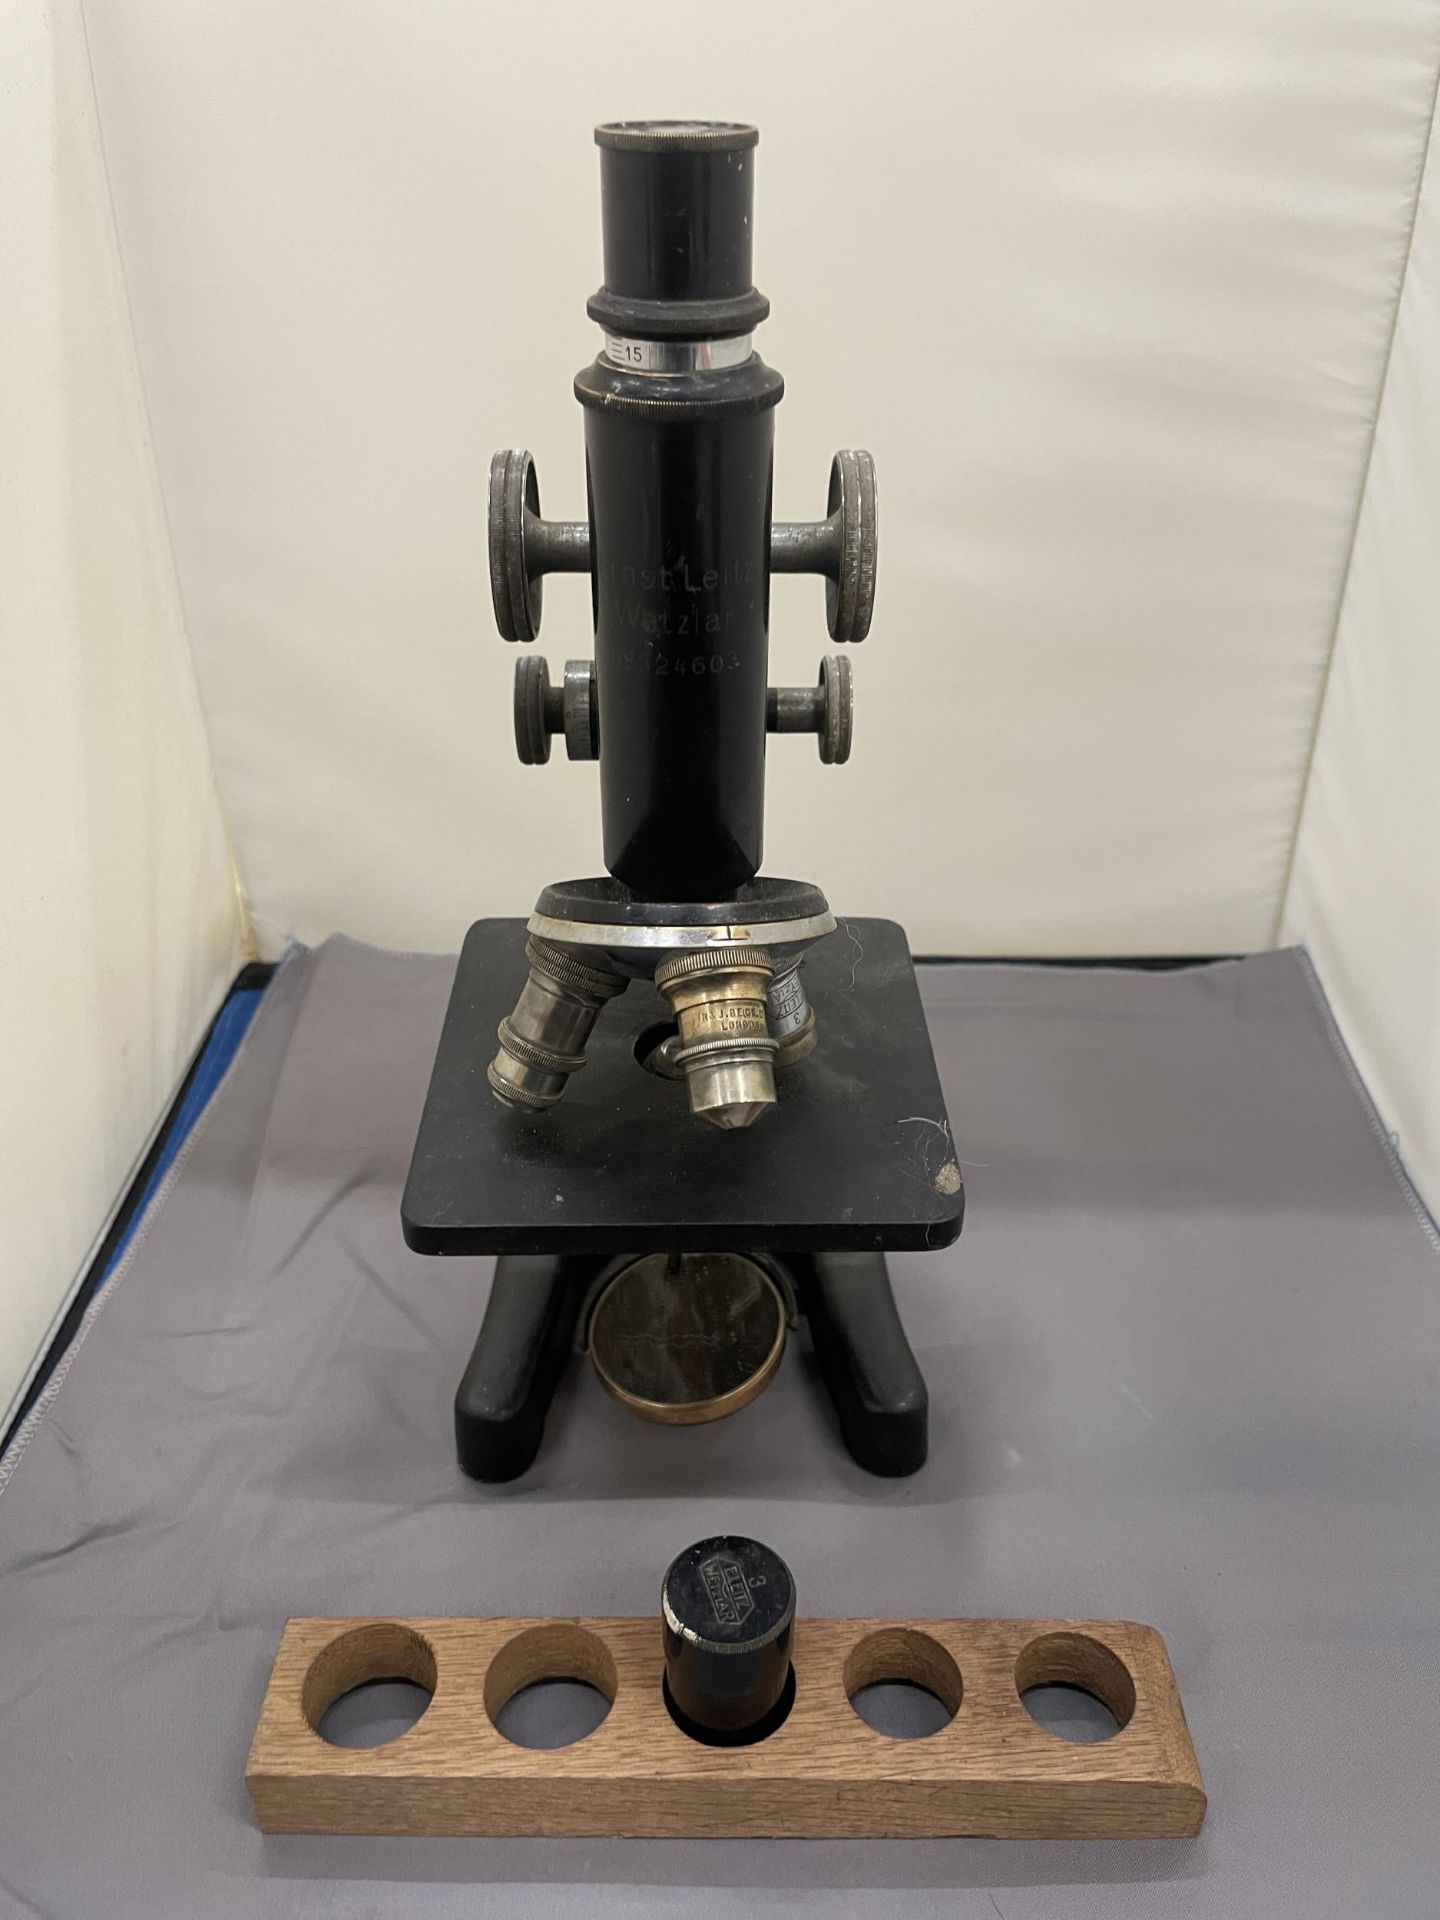 AN ERNST LEITZ WETZLAR MICROSCOPE, NO. 324603, WITH WOOD TRAY AND SPARE LENS